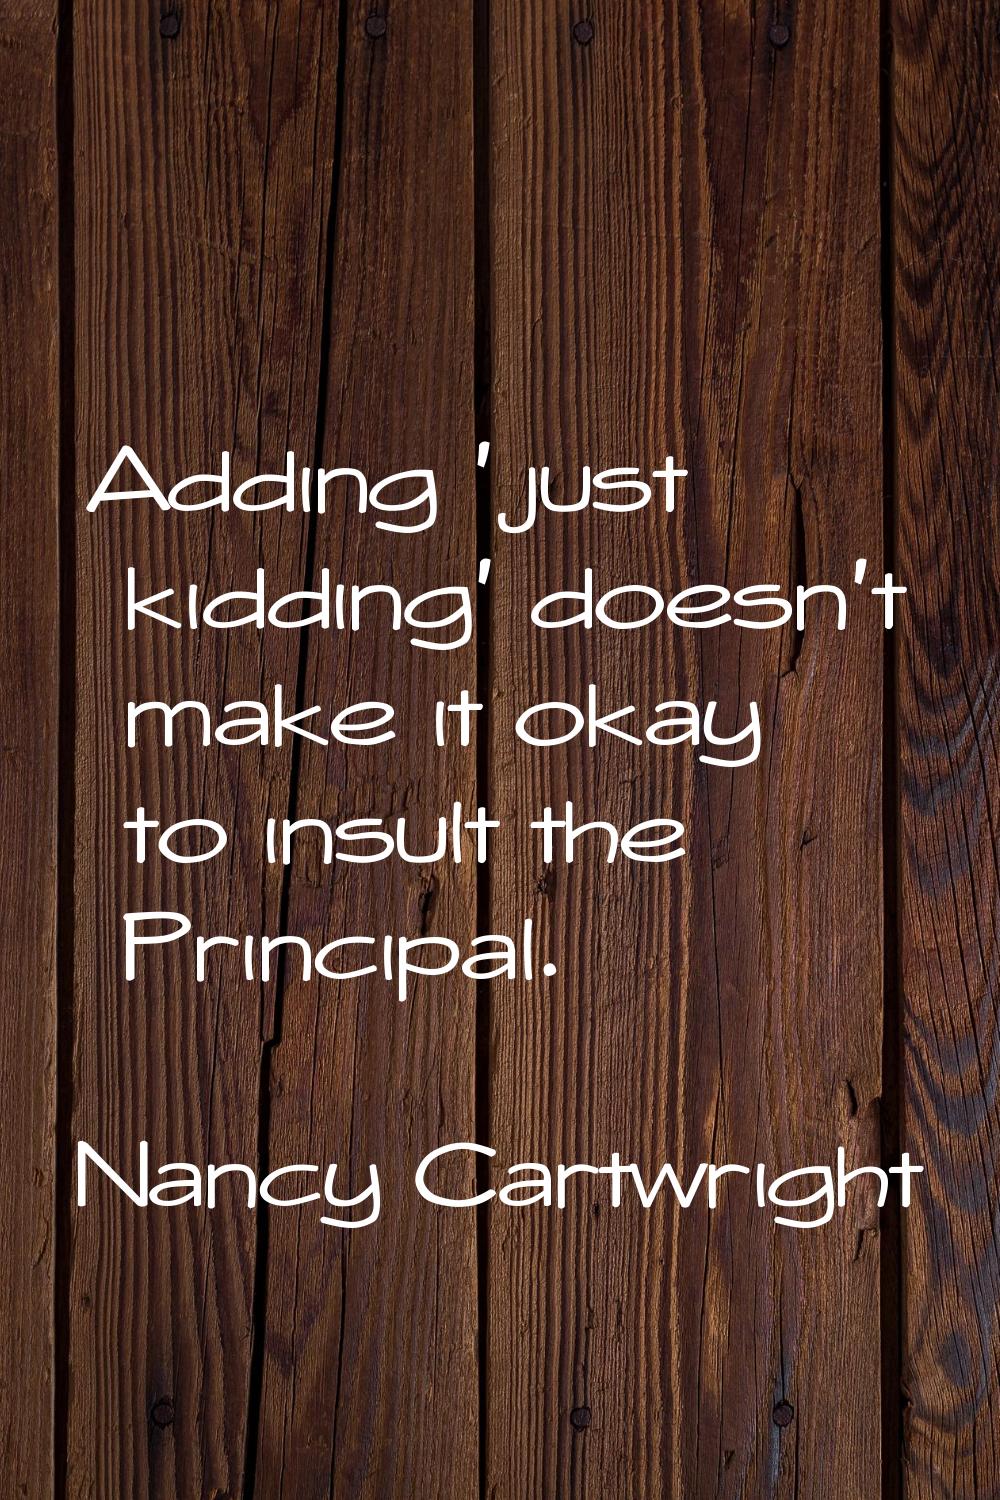 Adding 'just kidding' doesn't make it okay to insult the Principal.